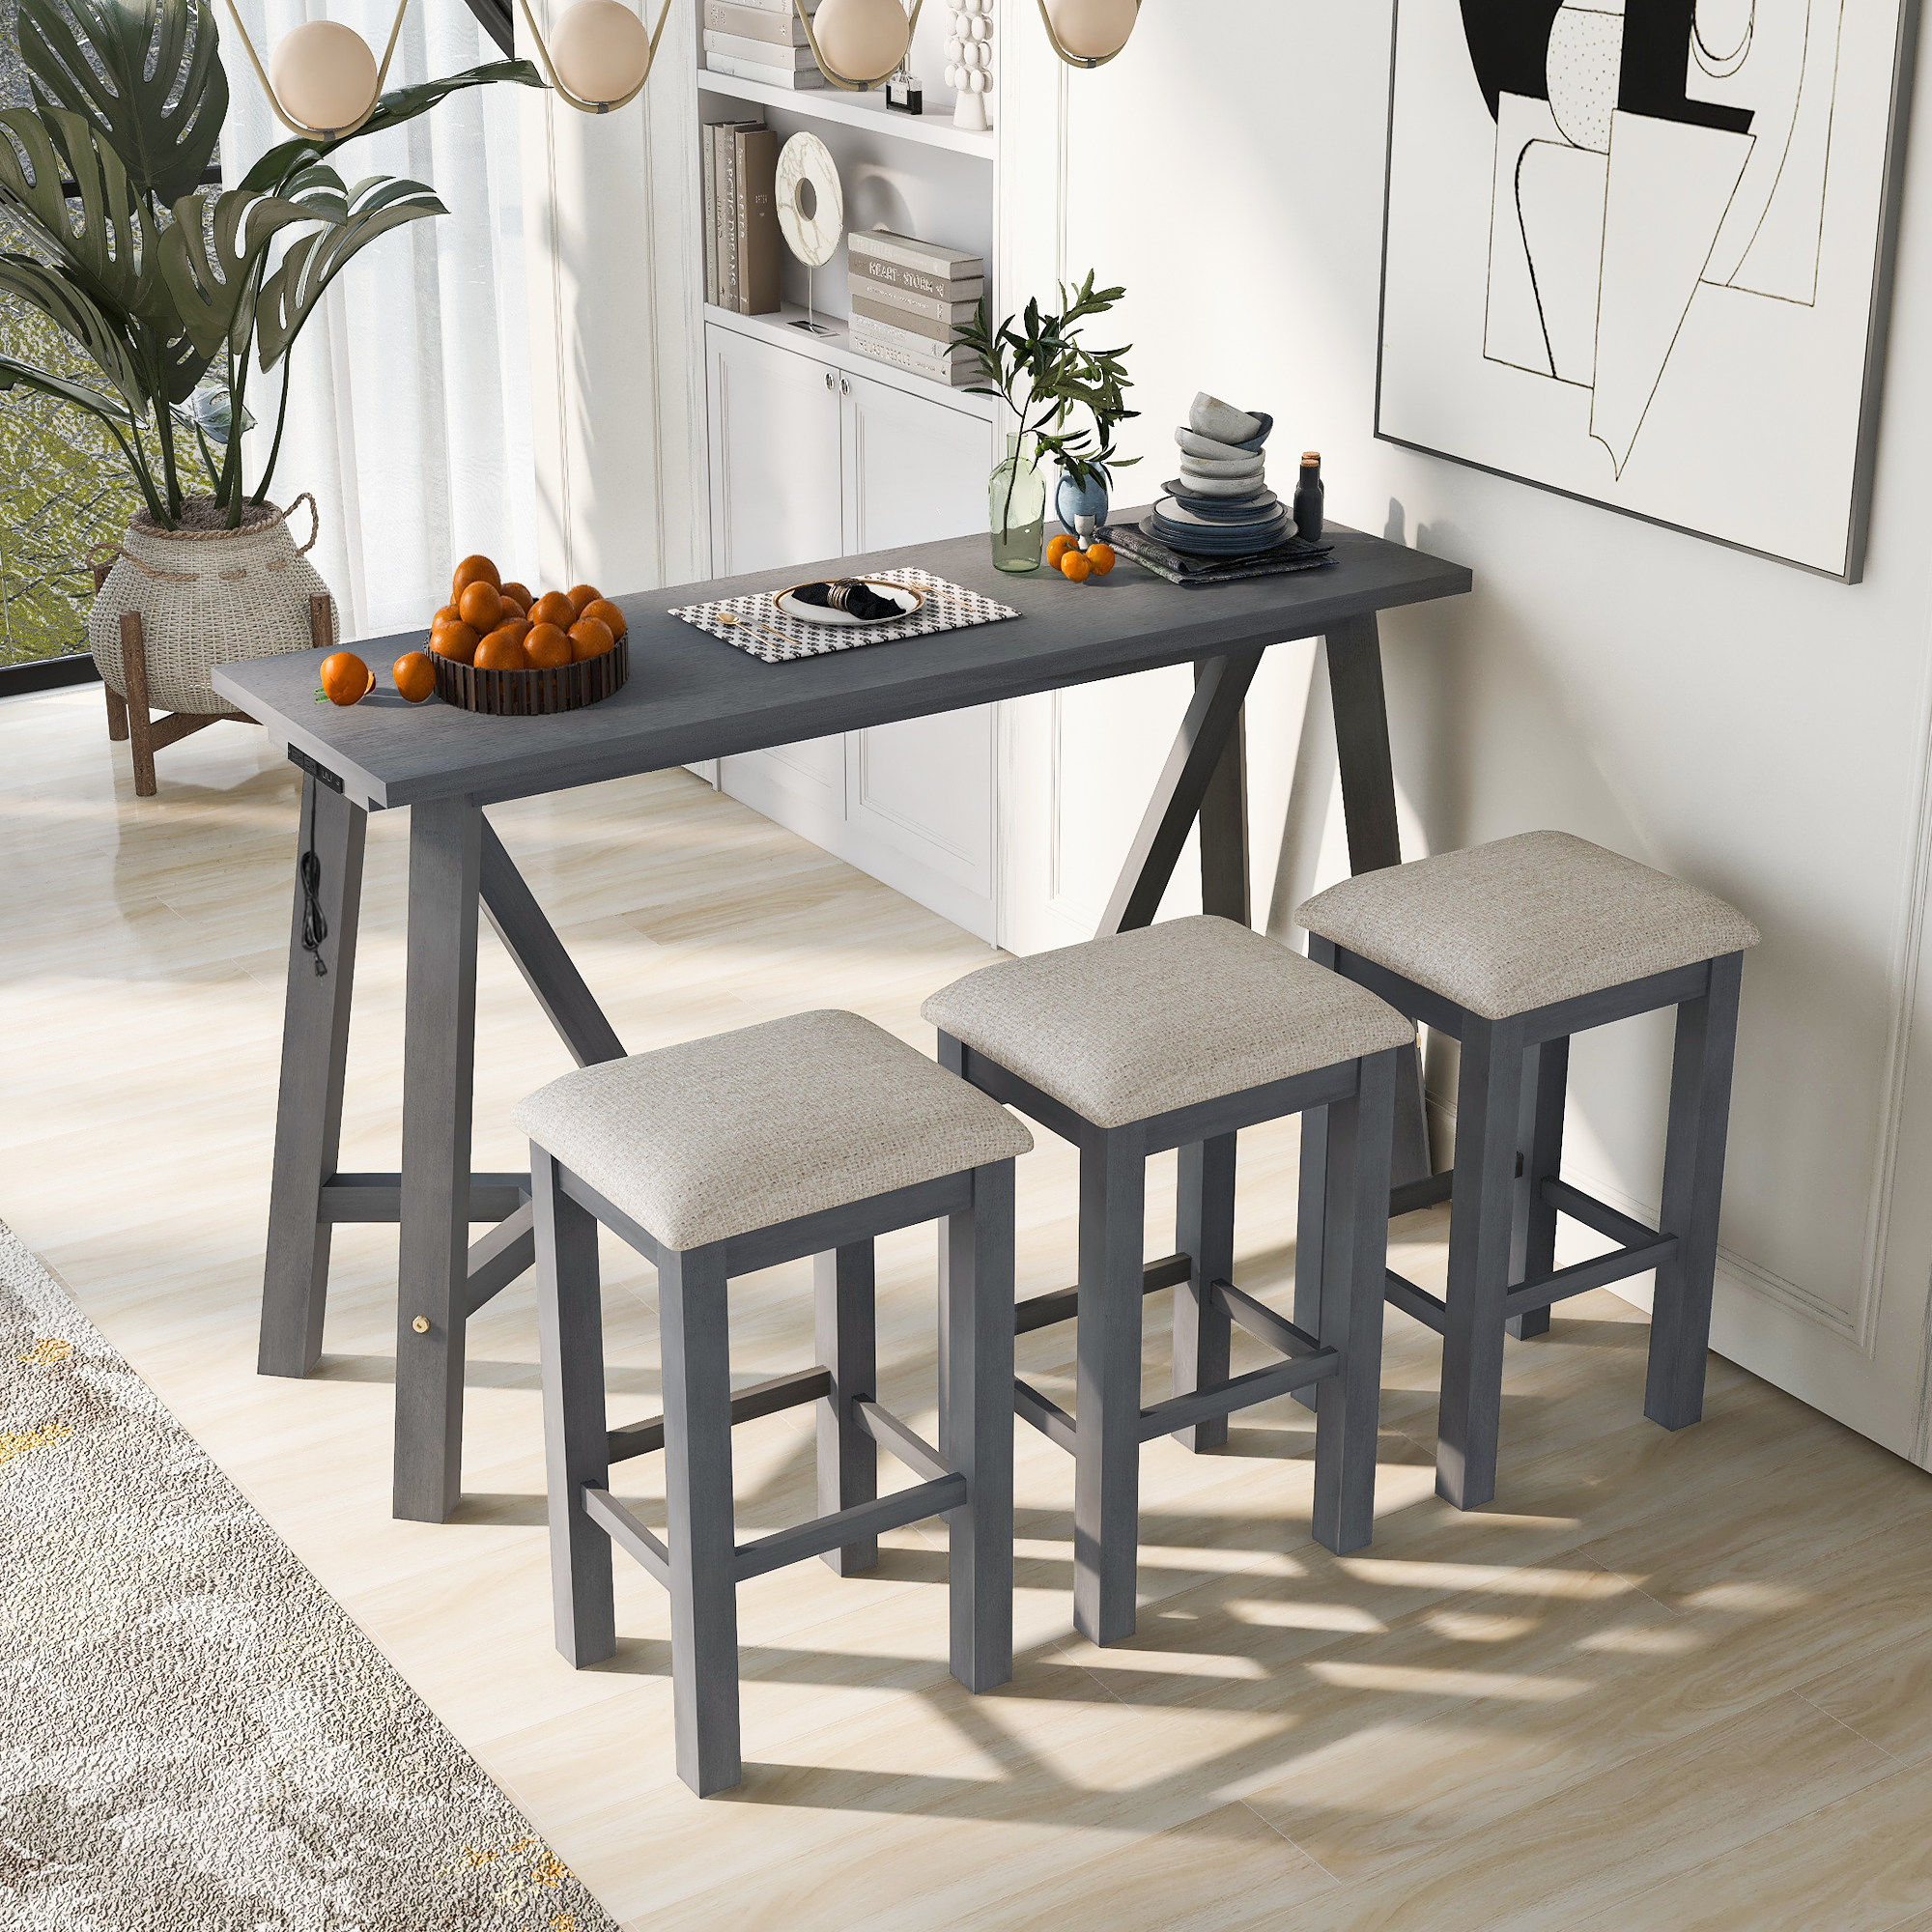 TREXM Multipurpose Home Kitchen Dining Bar Table Set with 3 Upholstered Stools(Gray)